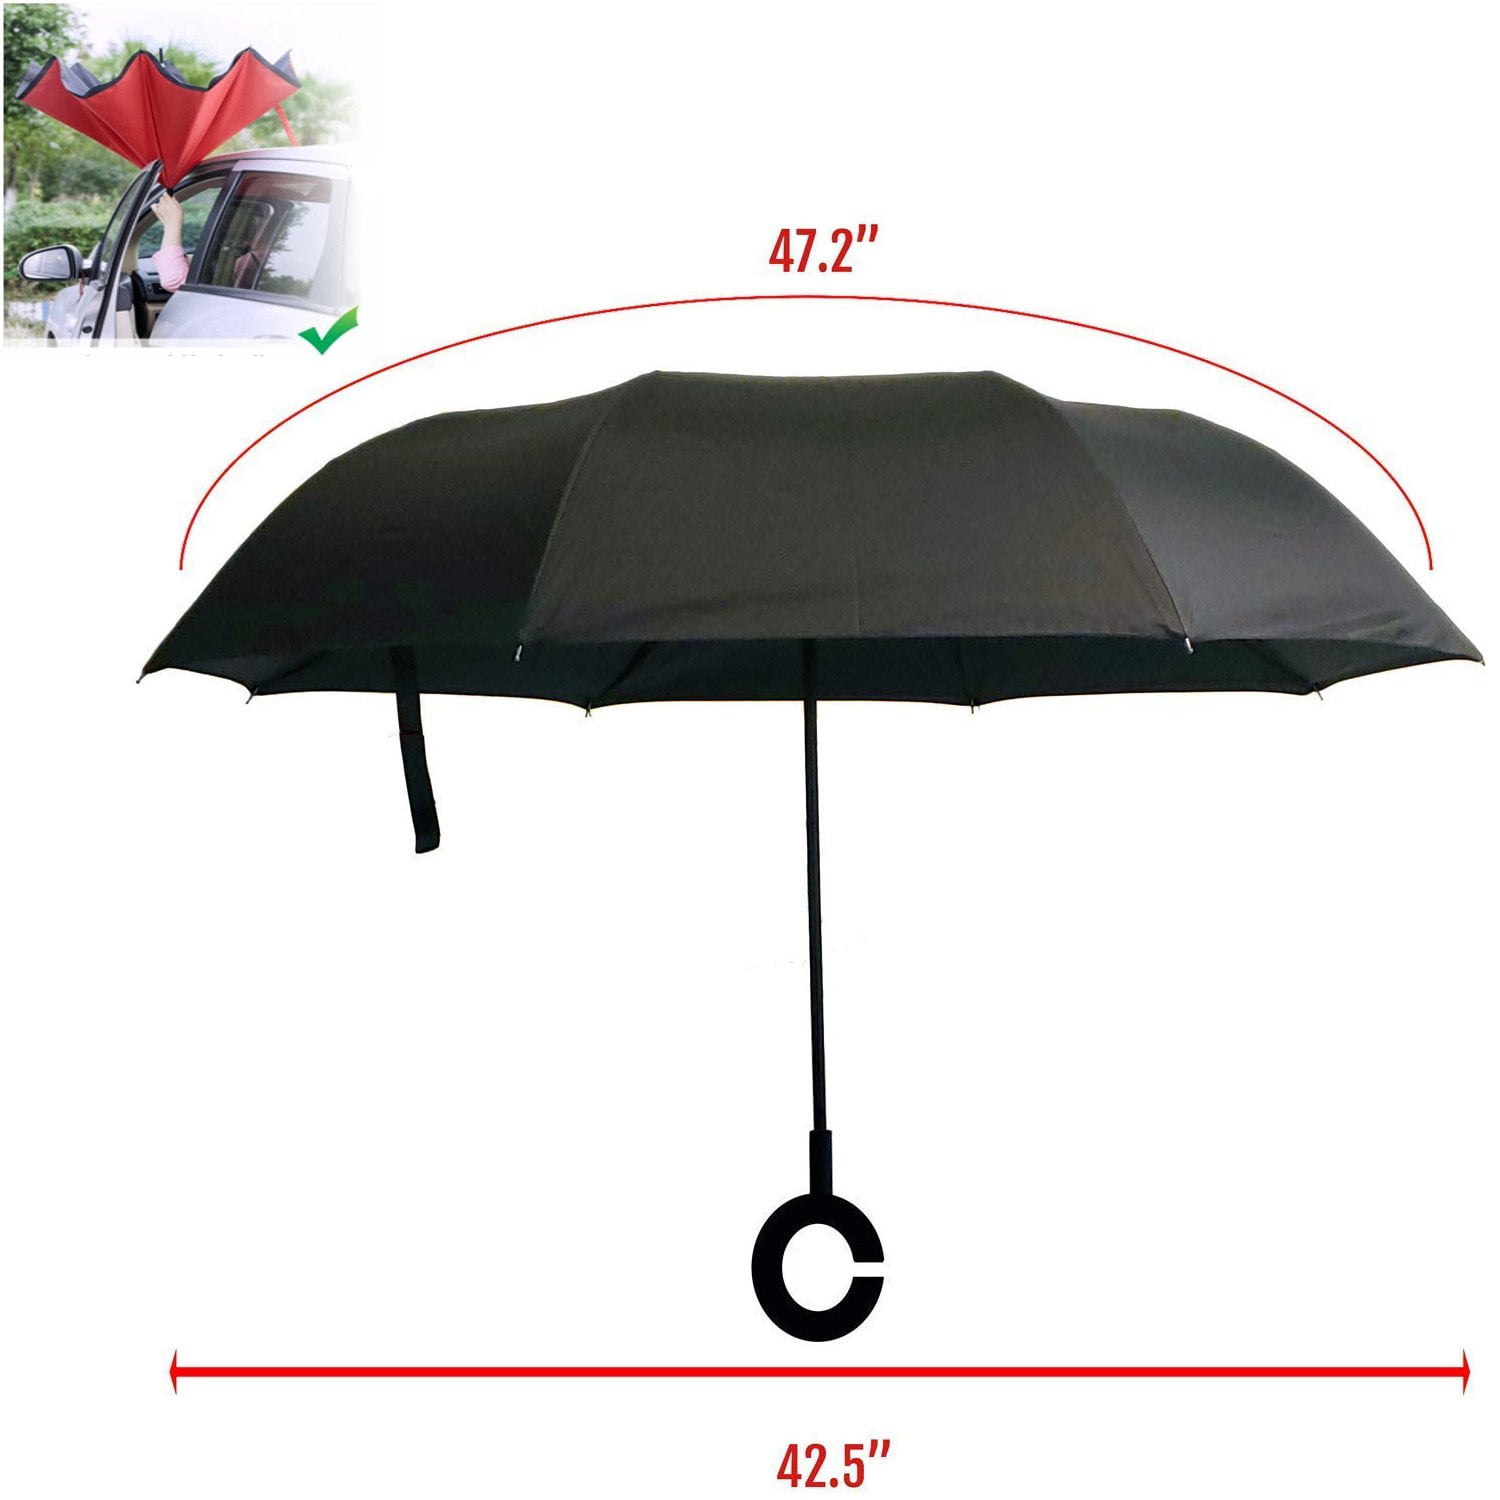 Drone Technology Futuristic Double Layer Windproof UV Protection Reverse Umbrella With C-Shaped Handle Upside-Down Inverted Umbrella For Car Rain Outdoor